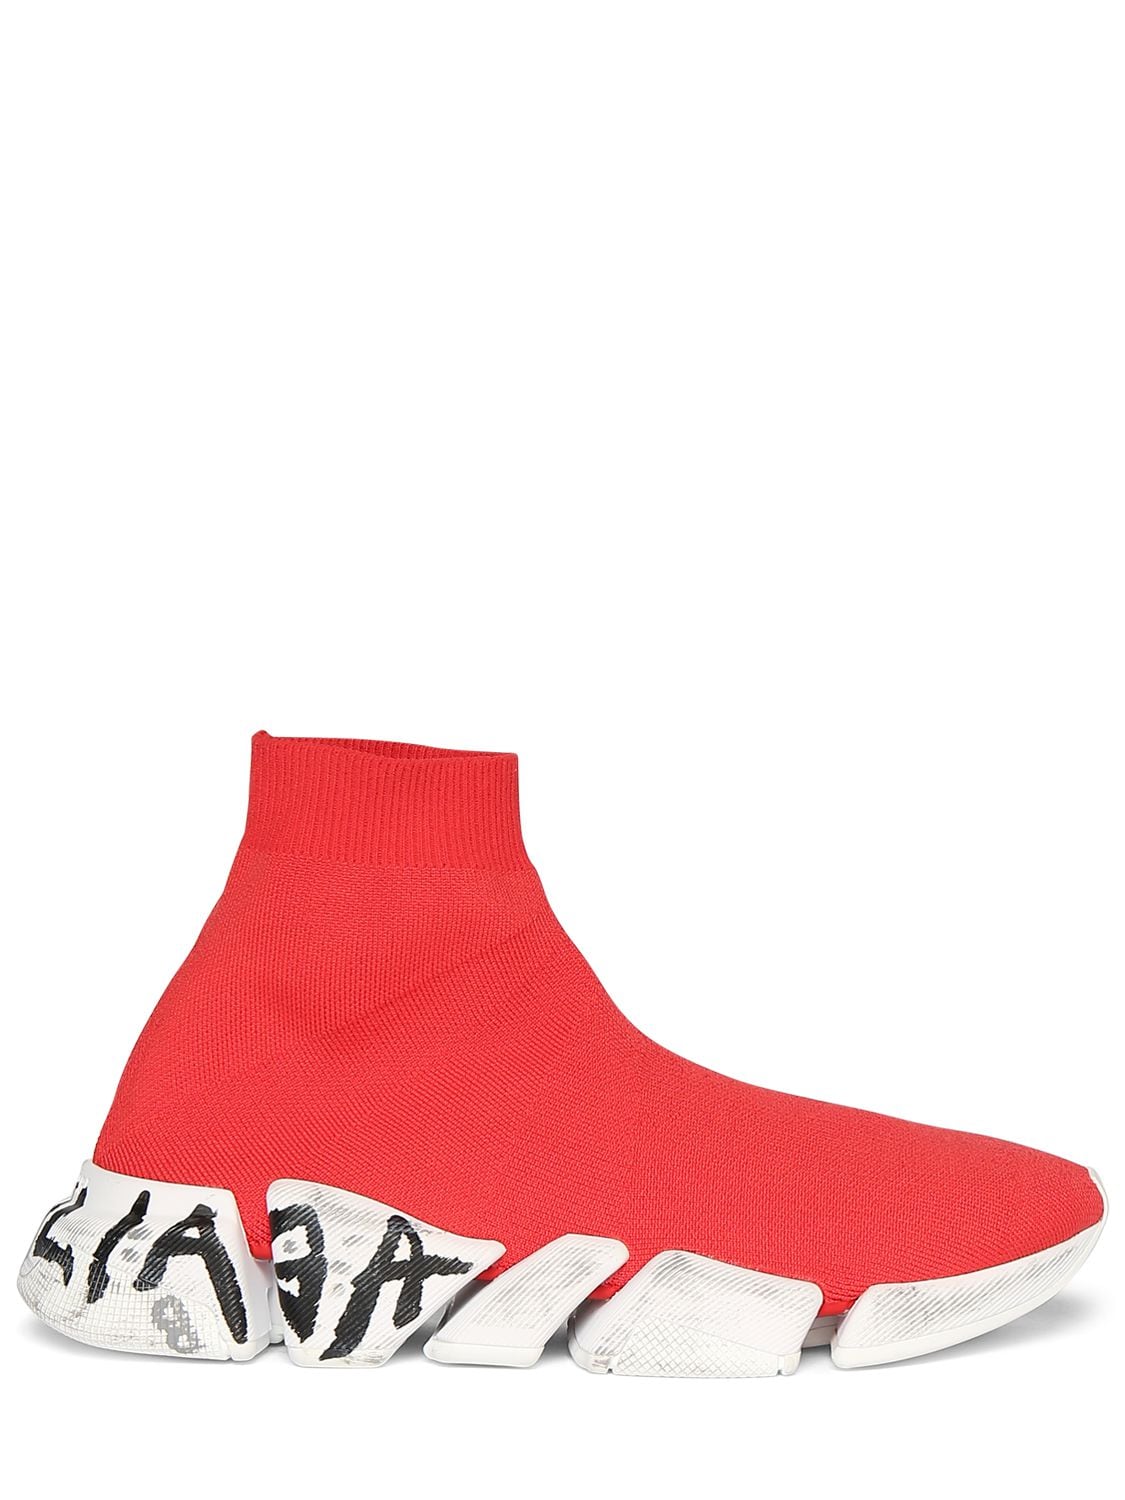 Balenciaga Speed 2.0 Trainers In Toma Red Whi Grf Bla